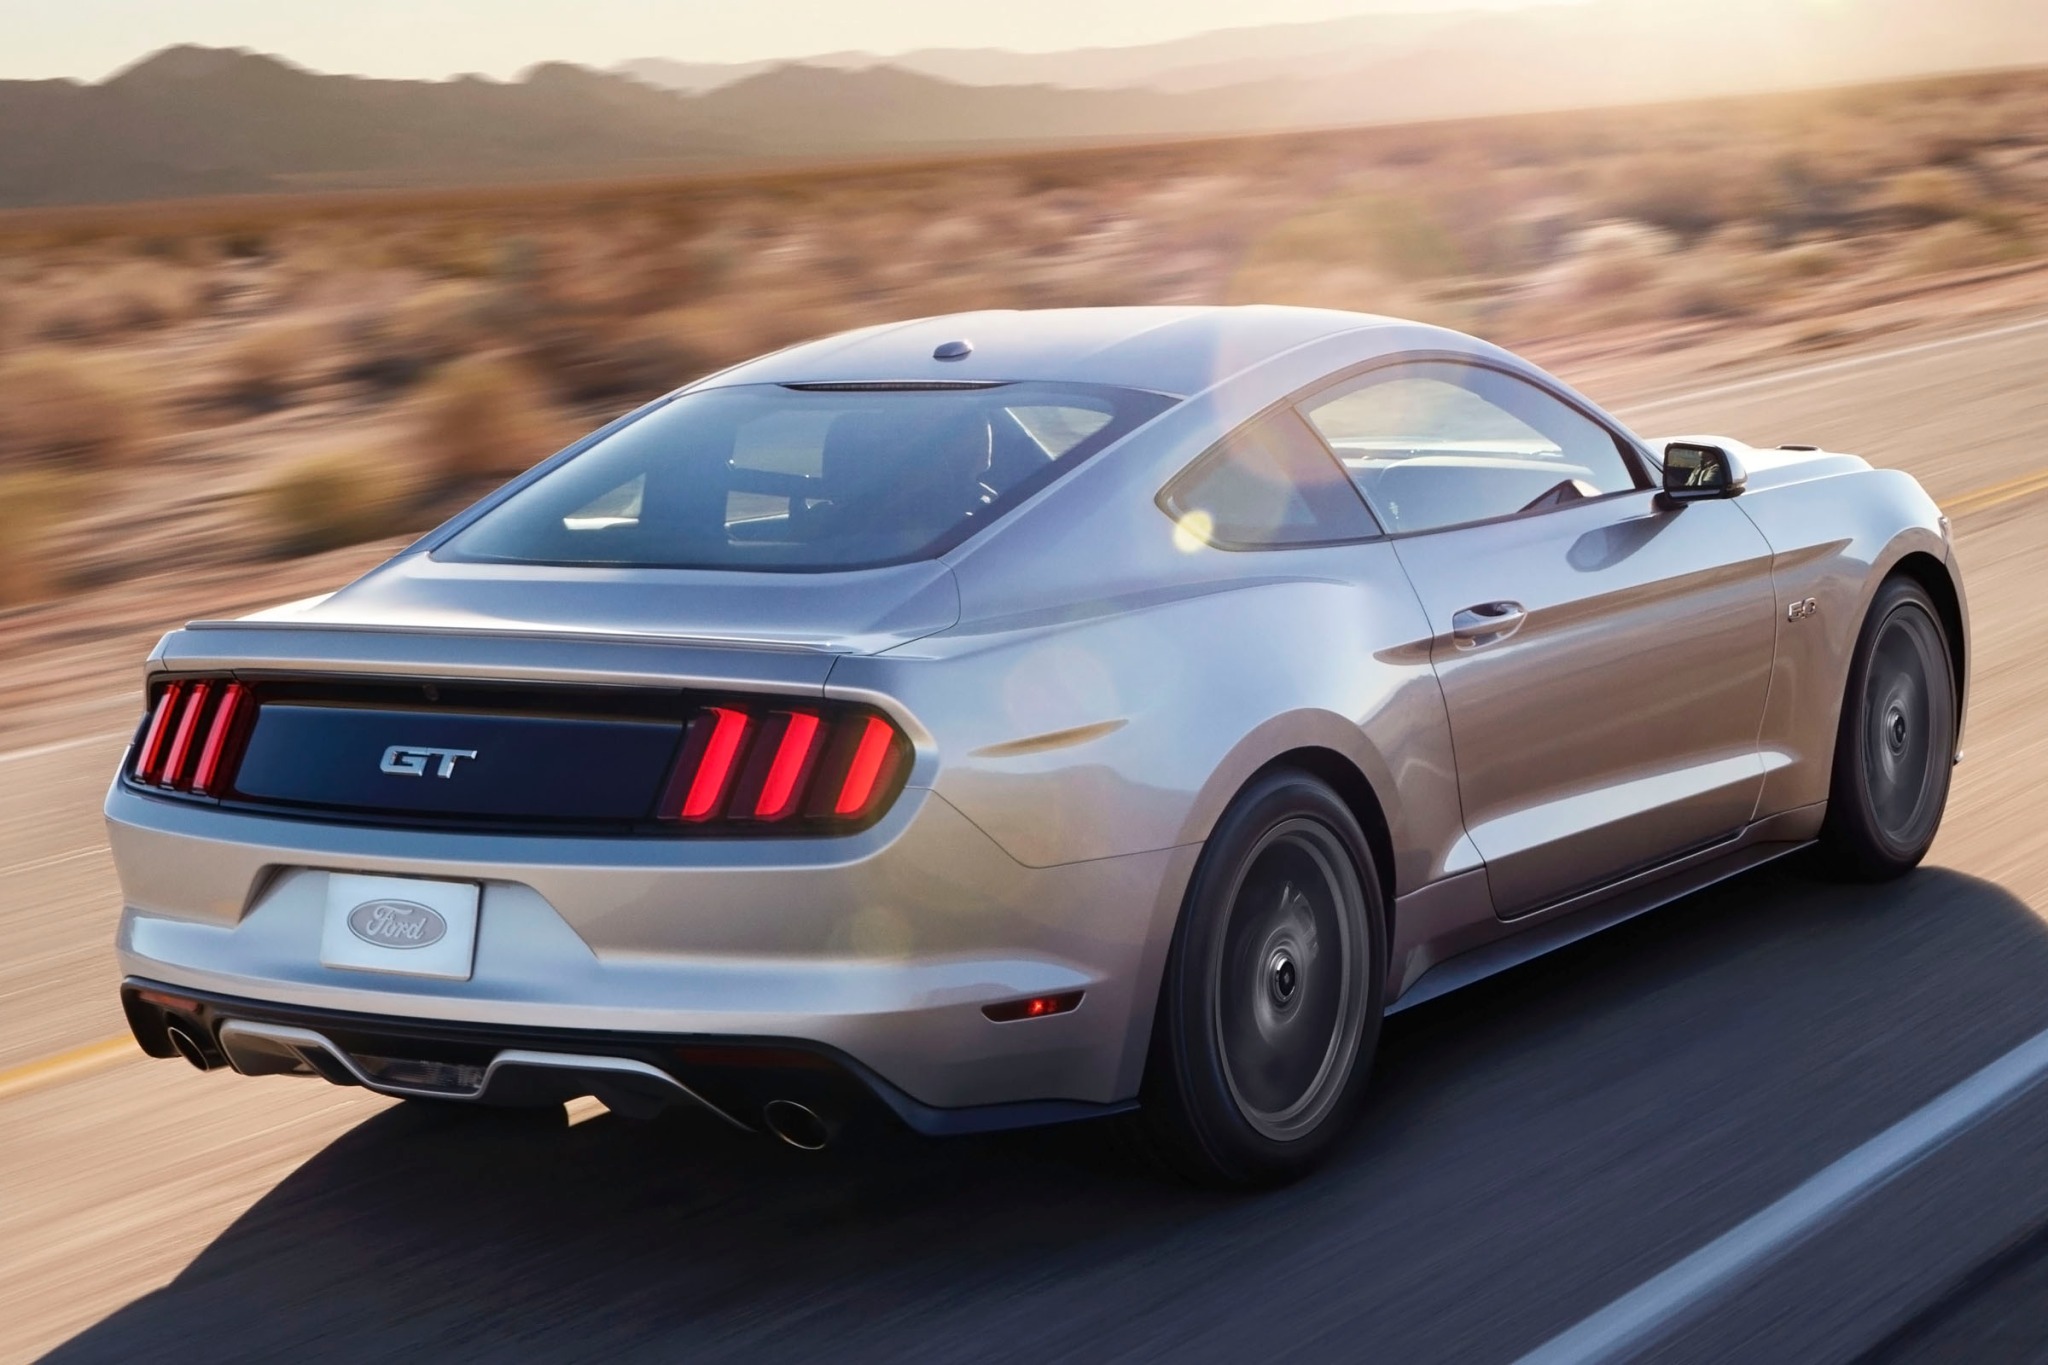 2017 Ford Mustang GT Premium Coupe Exterior